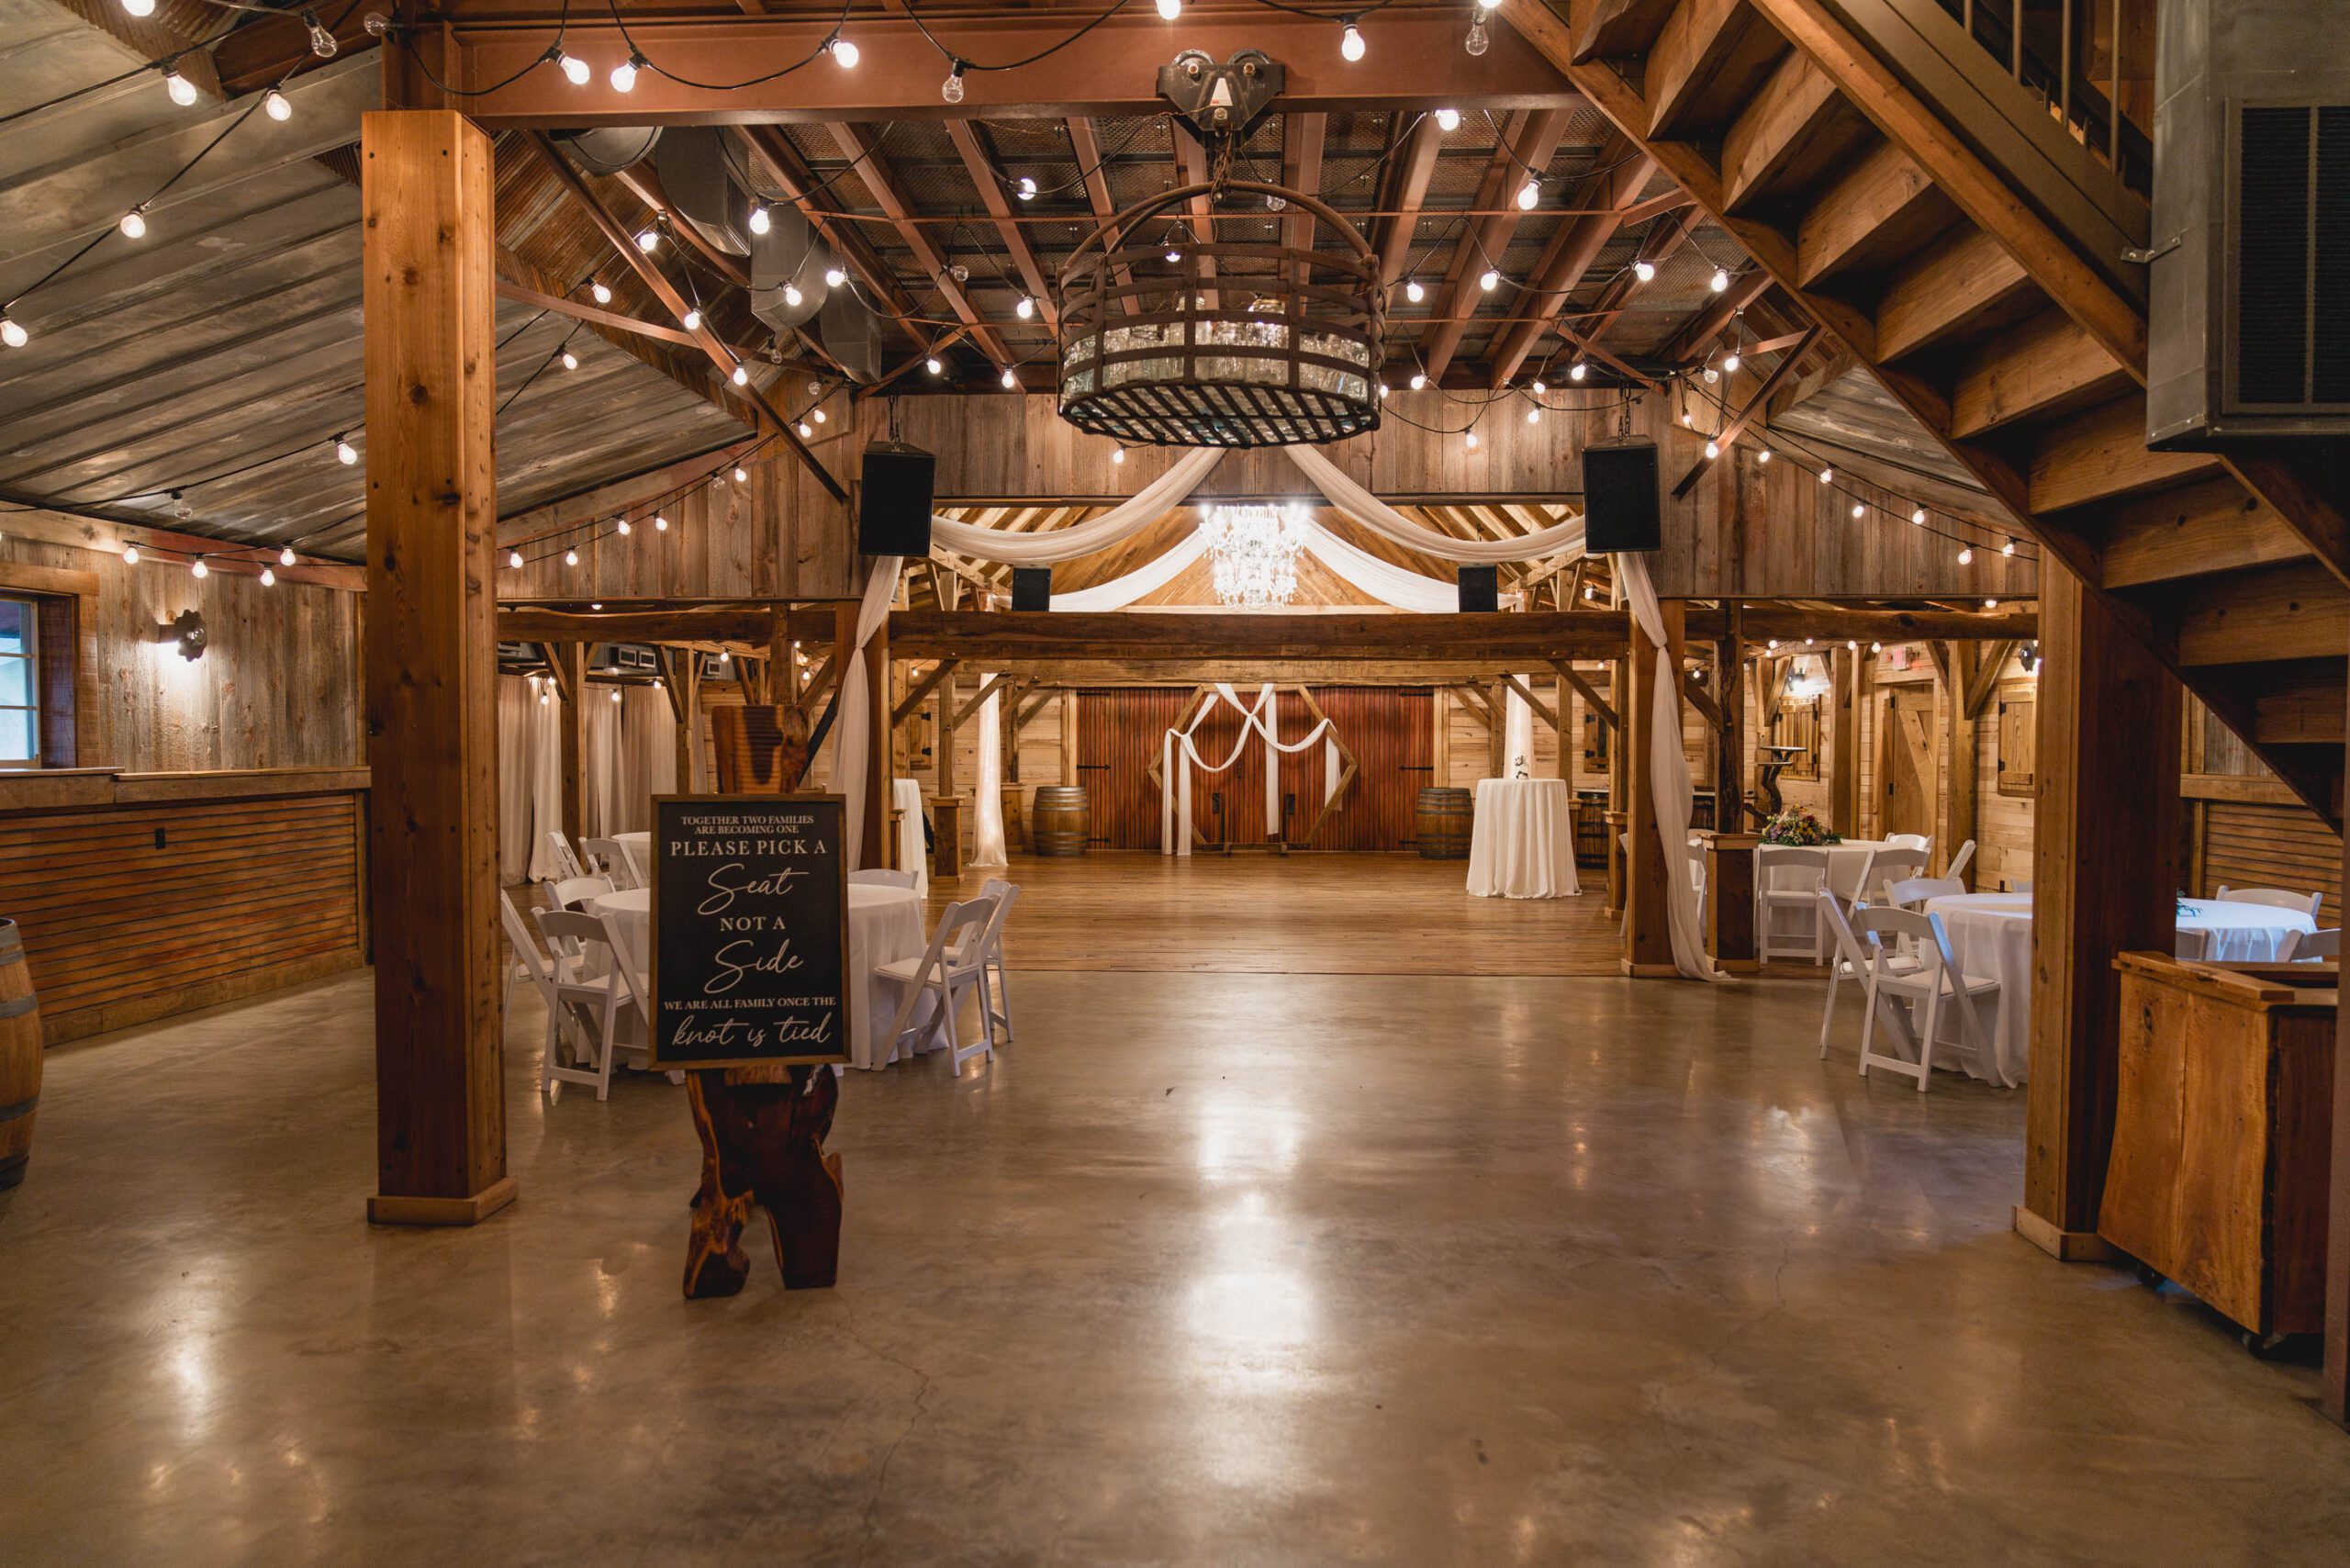 Hollow Hill Event Center Wedding and Event Venue, Weatherford, Texas. Large open room with round tables and chairs and stained concrete floors. Dark good walls and ceiling